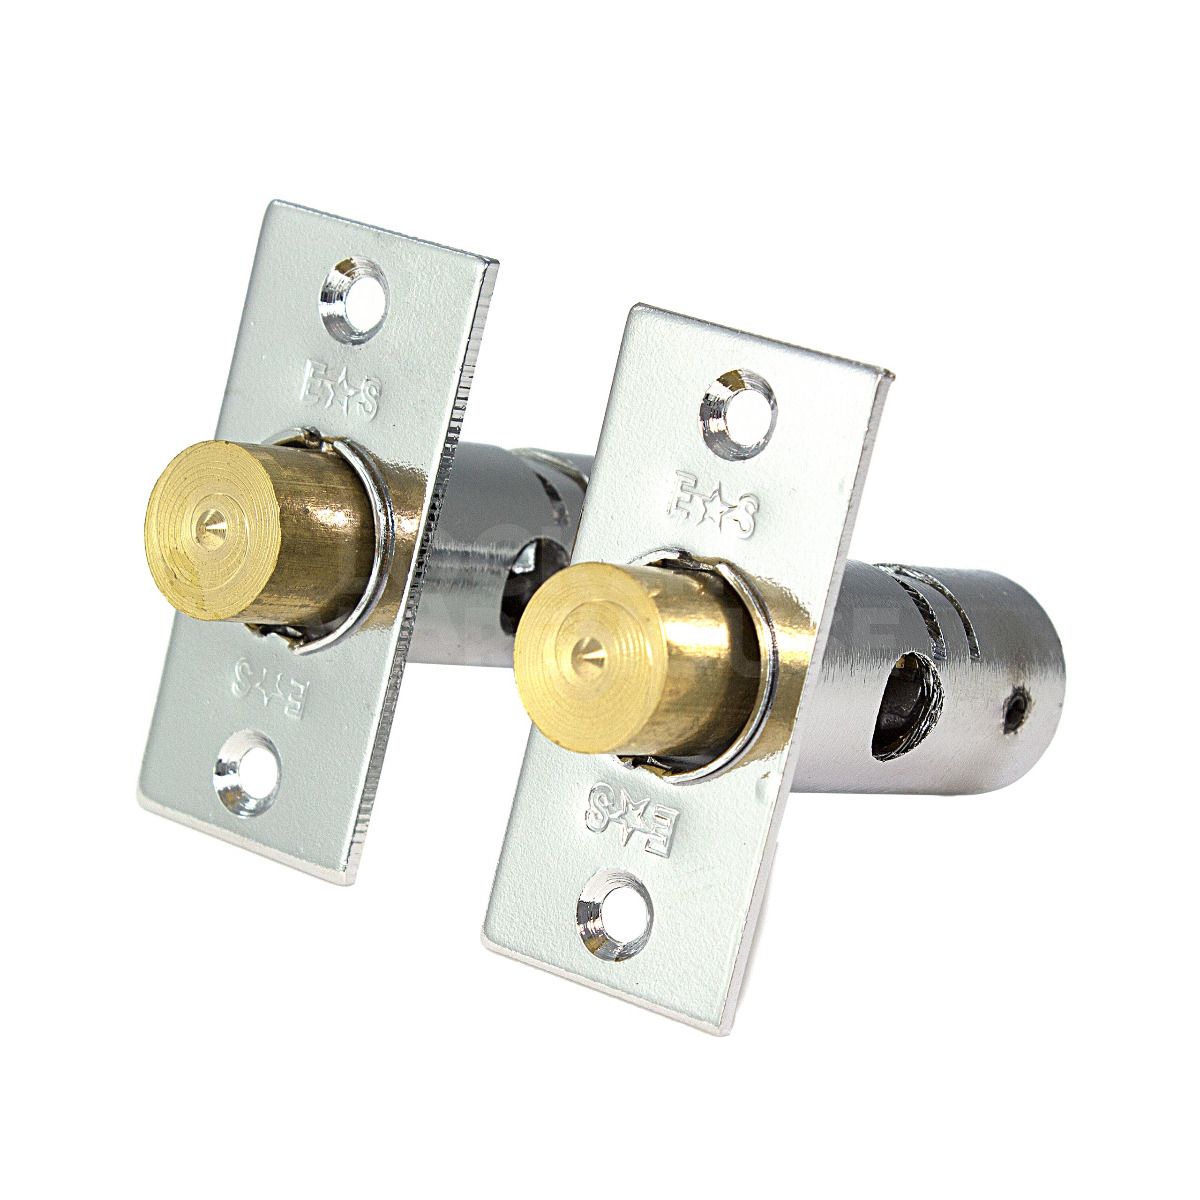 Asec Window Bolts ( 2 bolts and 1 key)